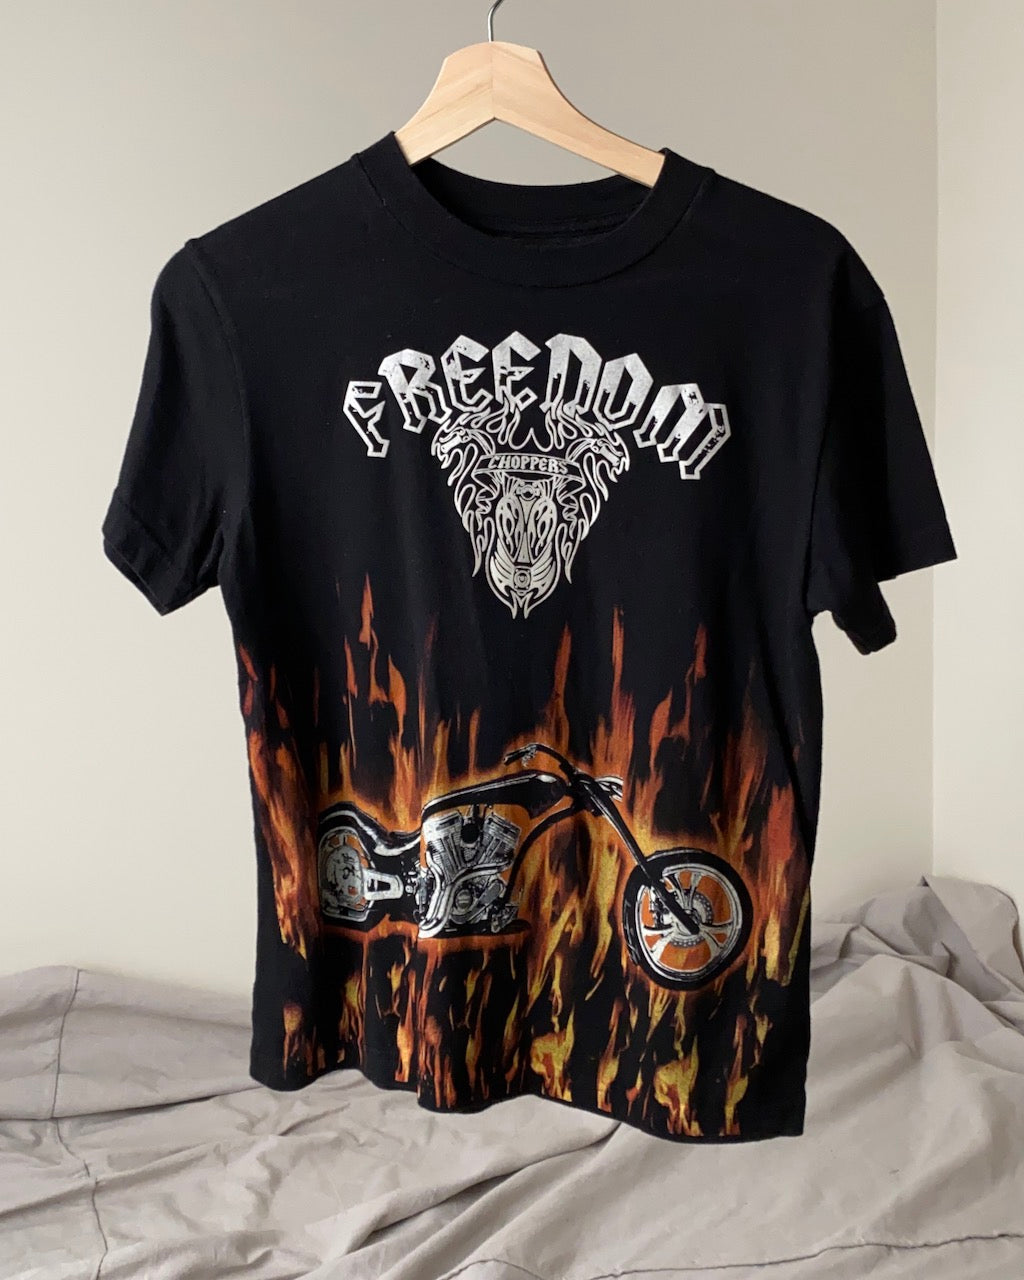 Freedom Choppers Motorcycle Tee (Fits S)